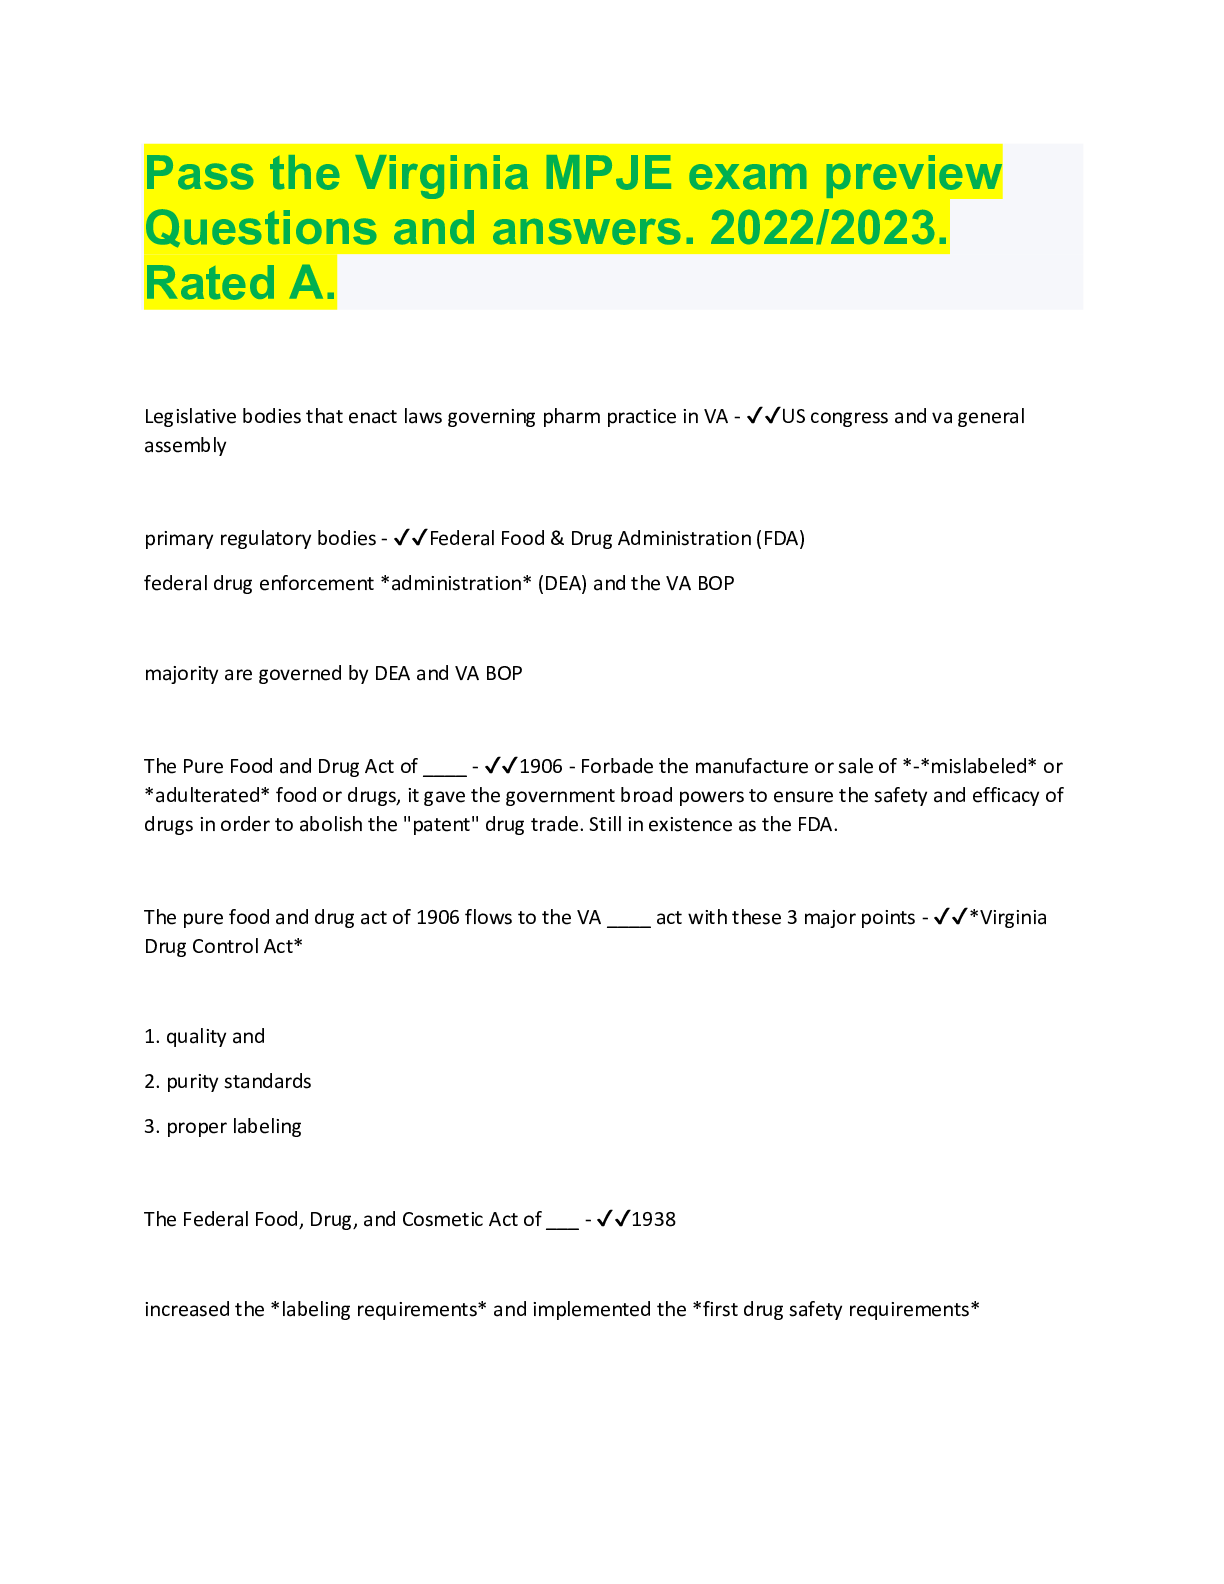 Pass the Virginia MPJE exam preview Questions and answers. 2022/2023